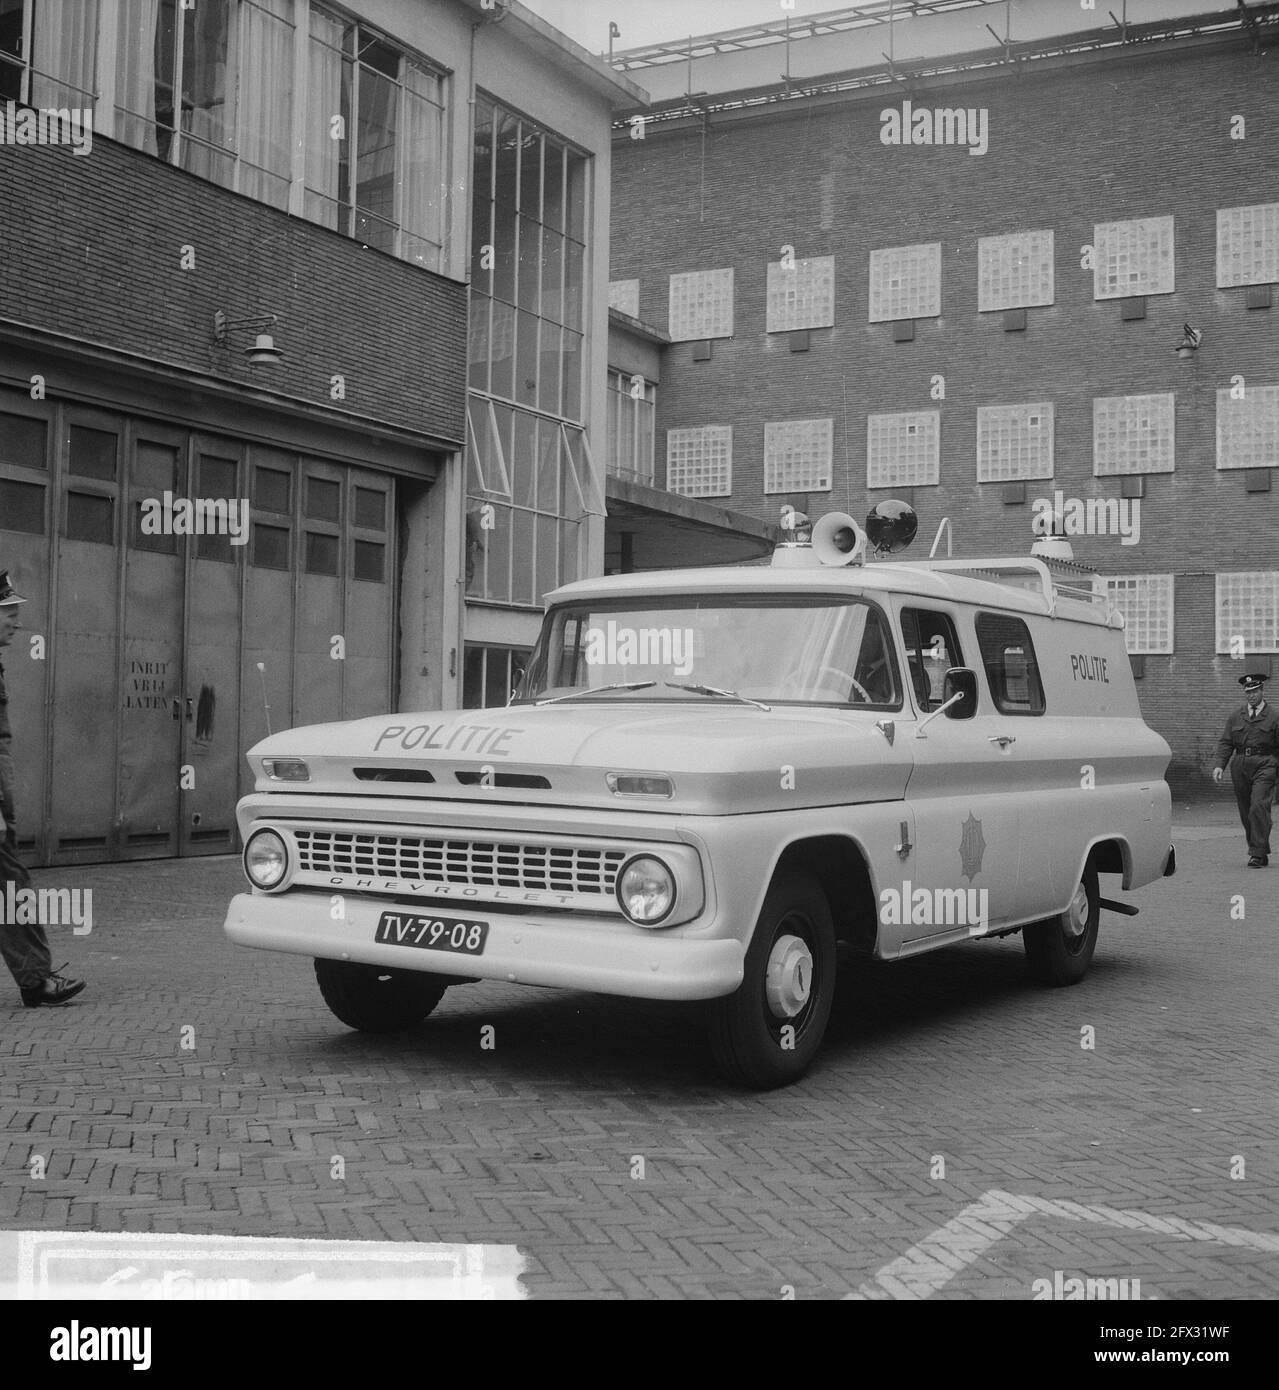 Amsterdam police new accident vehicle demonstrated a new Chevrolet, June 23, 1964, automobiles, The Netherlands, 20th century press agency photo, news to remember, documentary, historic photography 1945-1990, visual stories, human history of the Twentieth Century, capturing moments in time Stock Photo